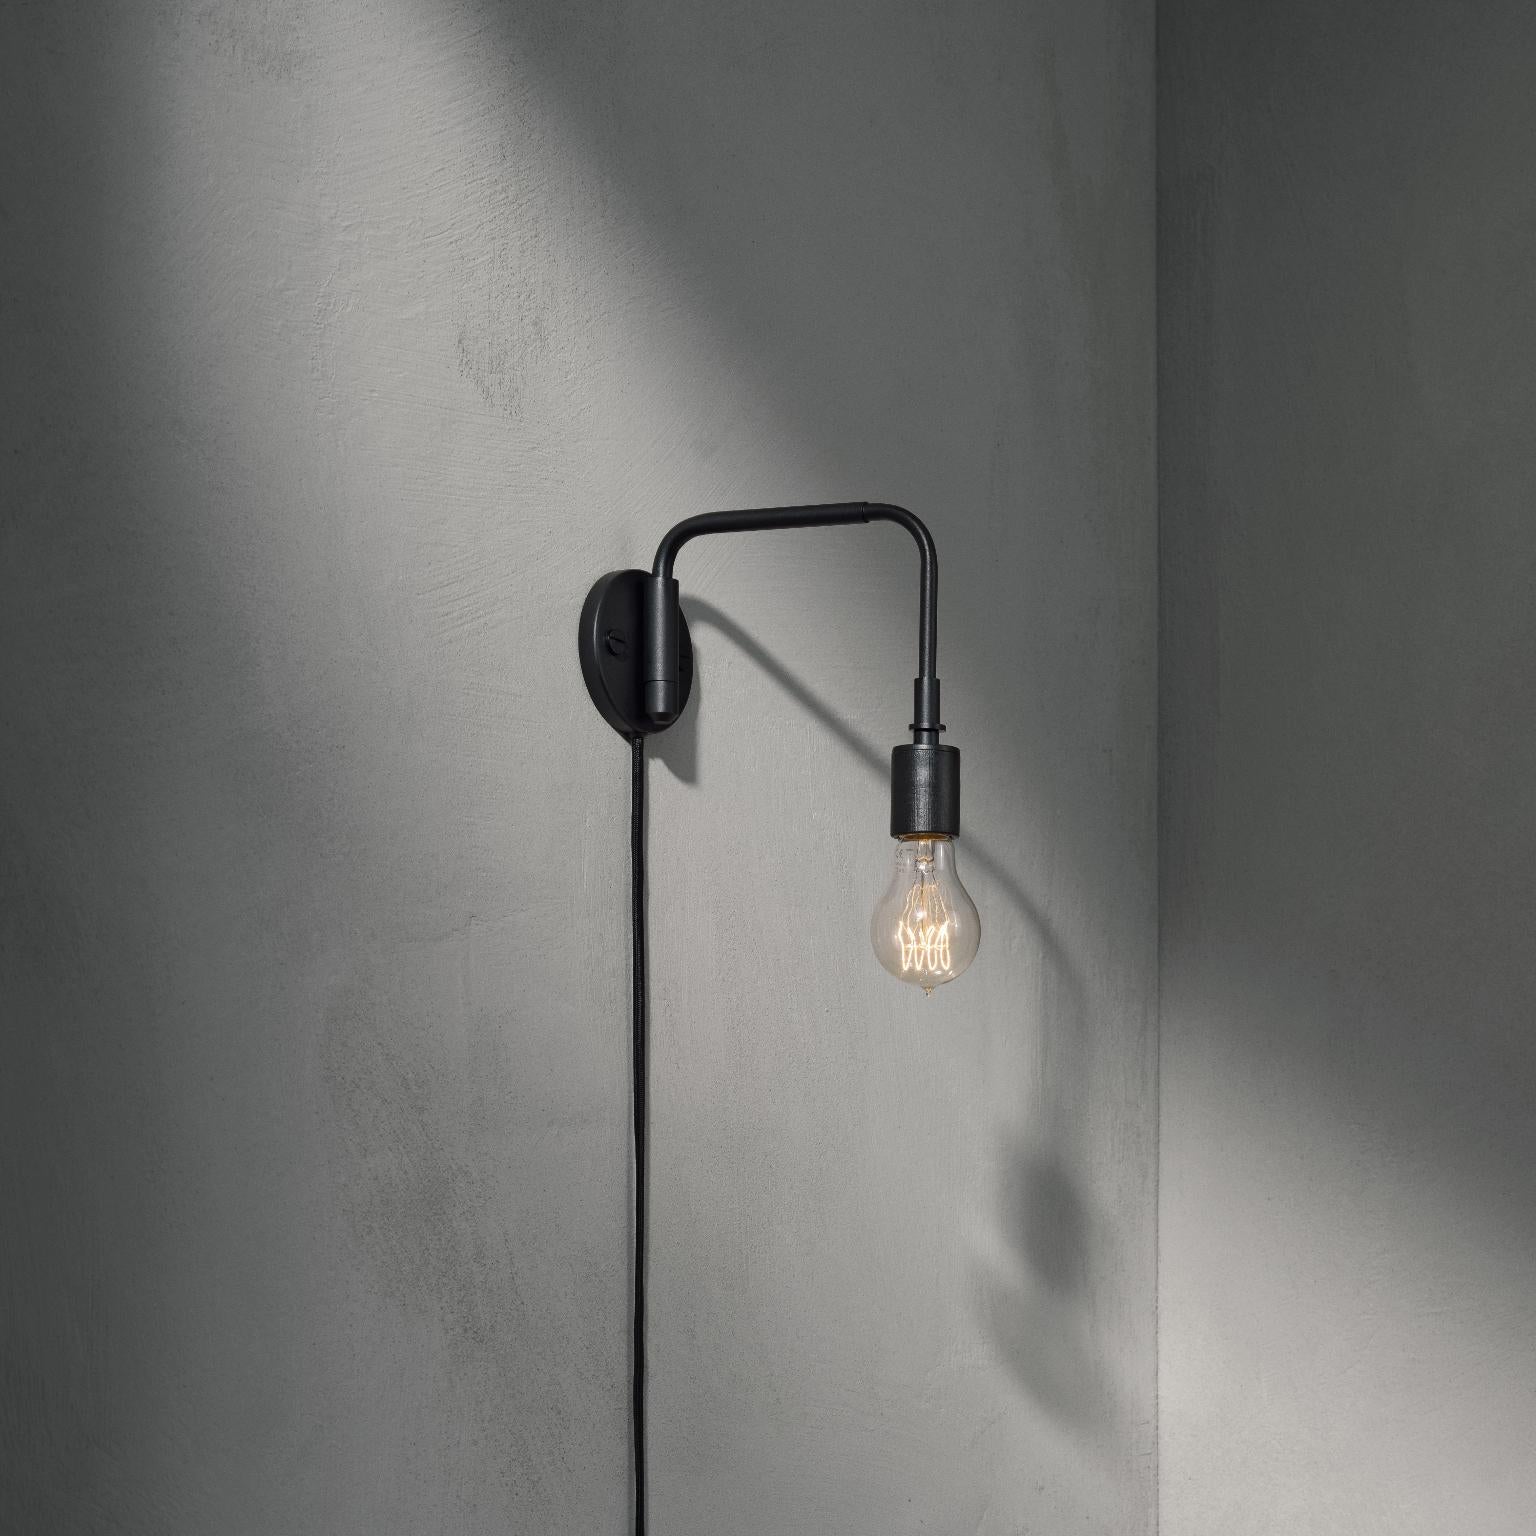 Chinese Staple Wall Lamp, Black, and One Tr Matte Bulb For Sale